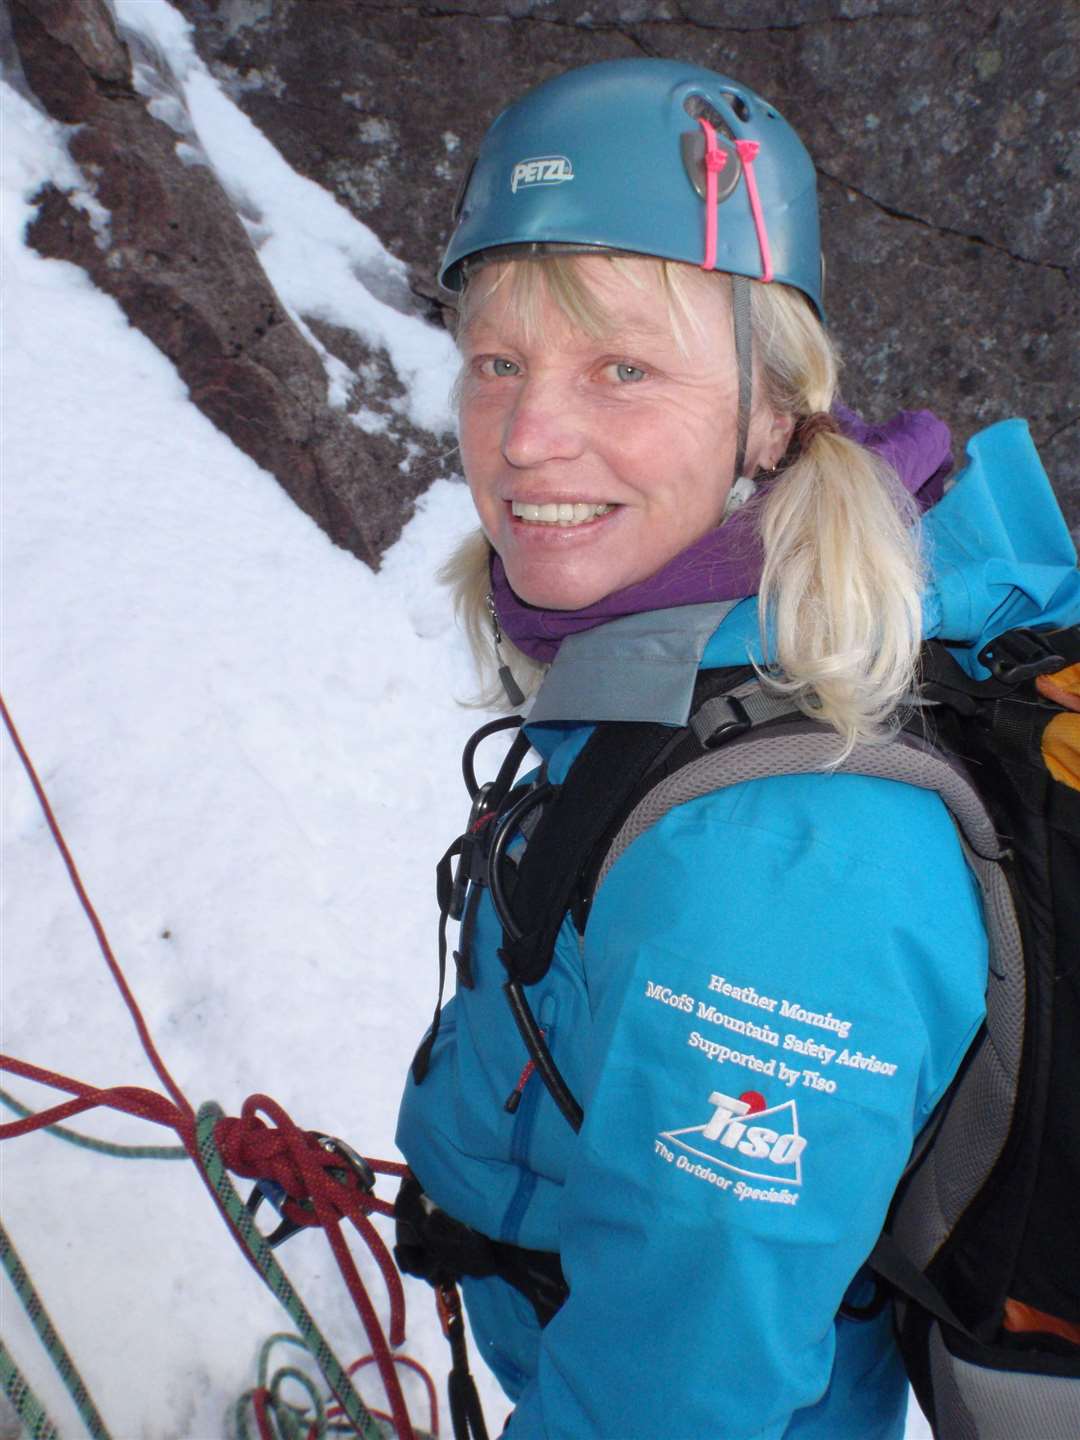 Heather Morning is urging people to get out of their comfort zone by trying a new adventure sport.